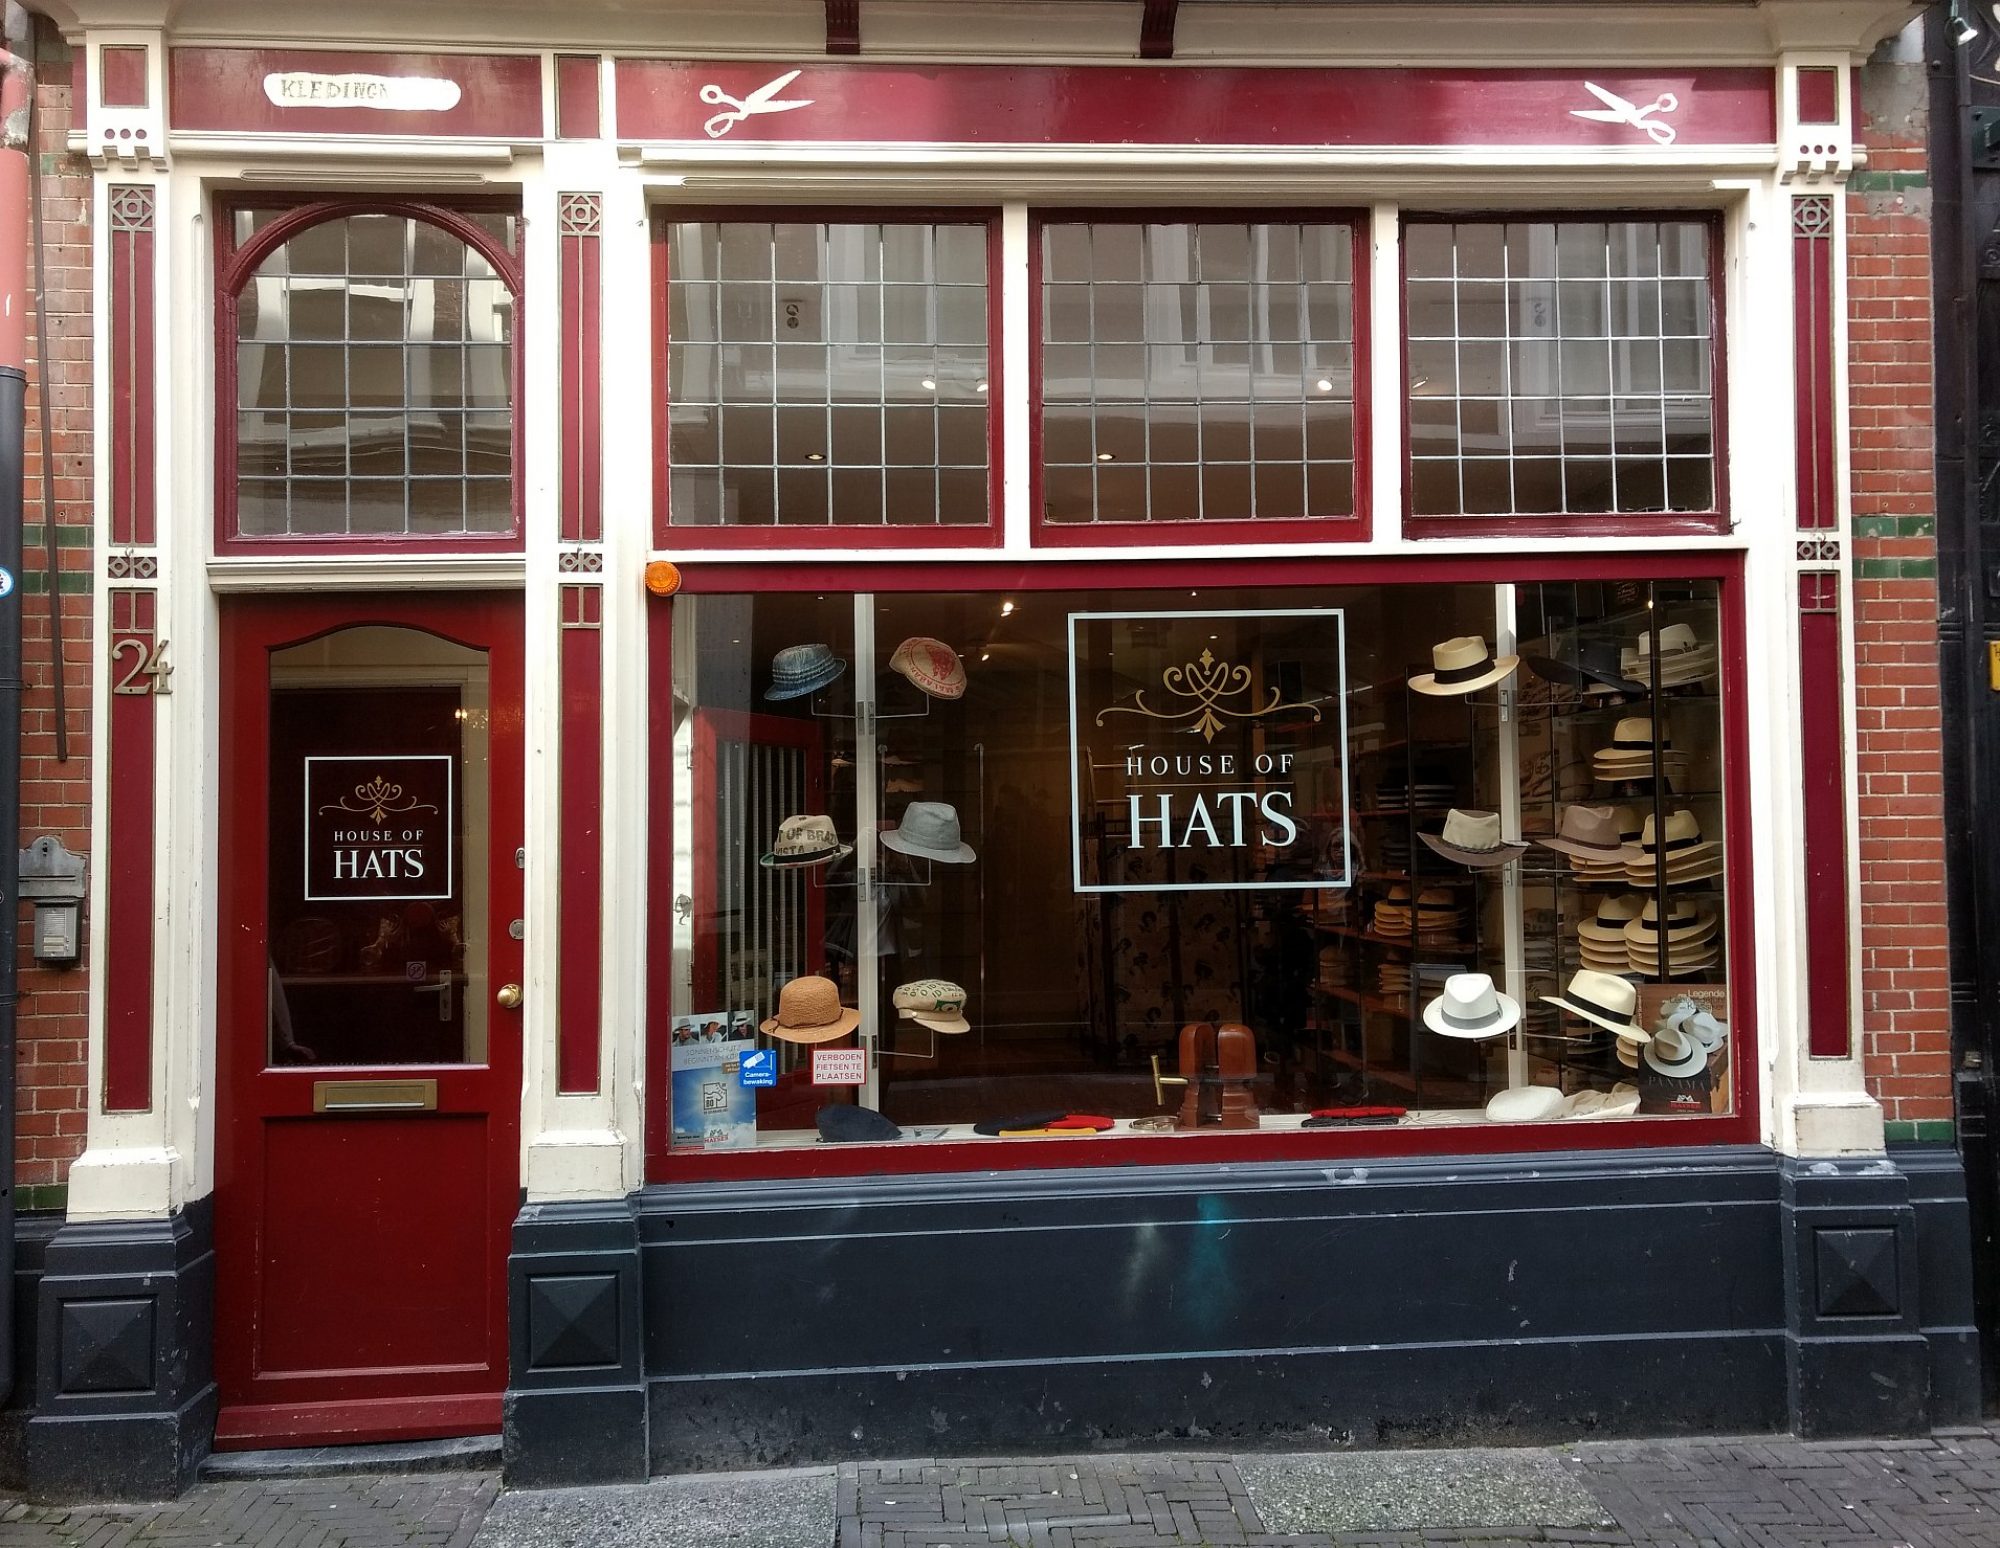 House of hats